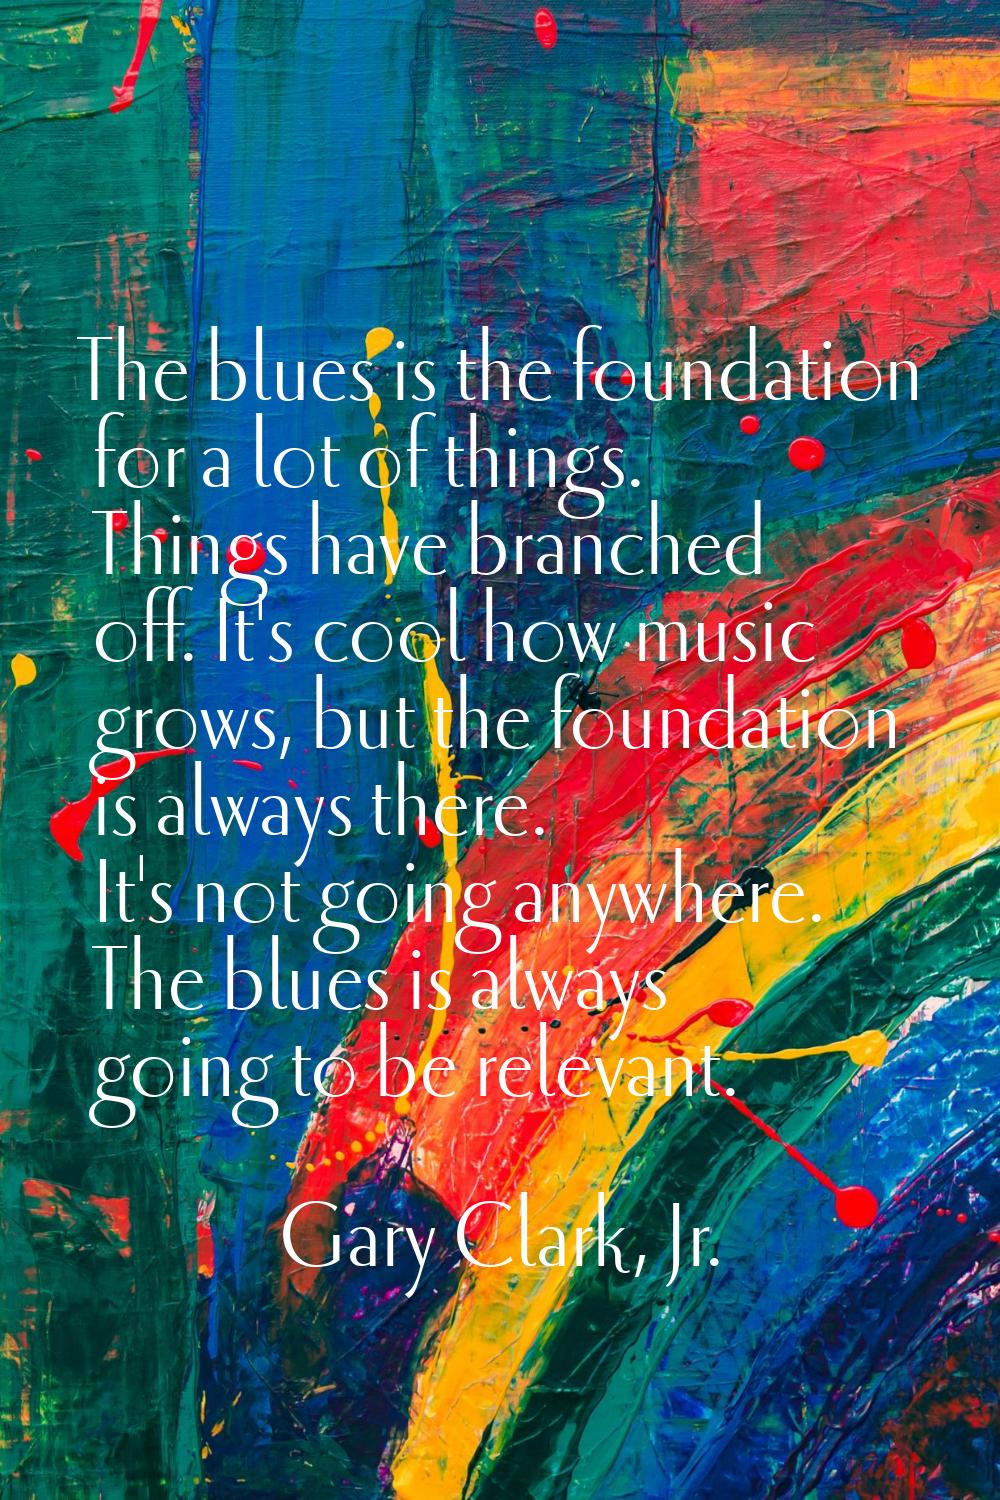 The blues is the foundation for a lot of things. Things have branched off. It's cool how music grow